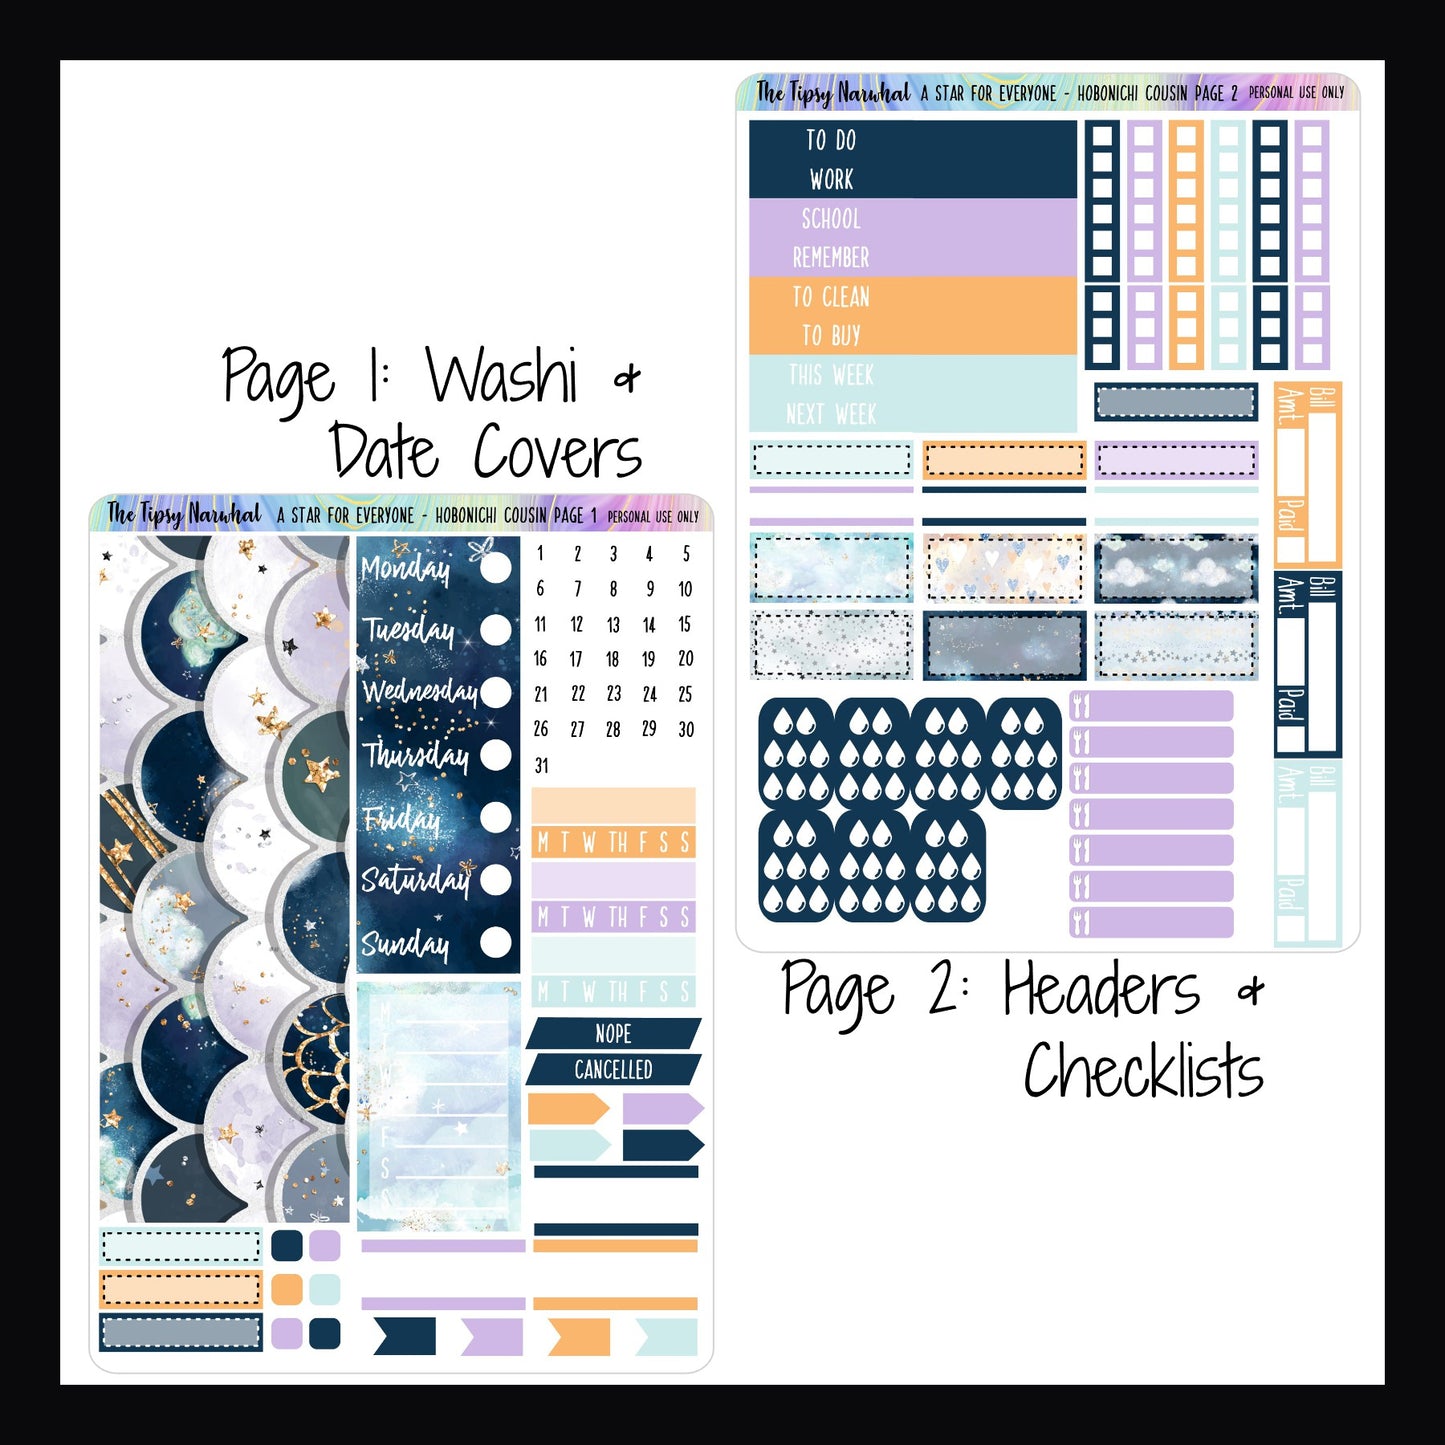 Digital A Star For Everyone Hobonichi Weeks Kit.  Page 1 features washi, date covers, habit trackers, and appointment stickers.  Page 2 features headers, checklist stickers, water tracking, meal tracking, bill tracking and appointment stickers.